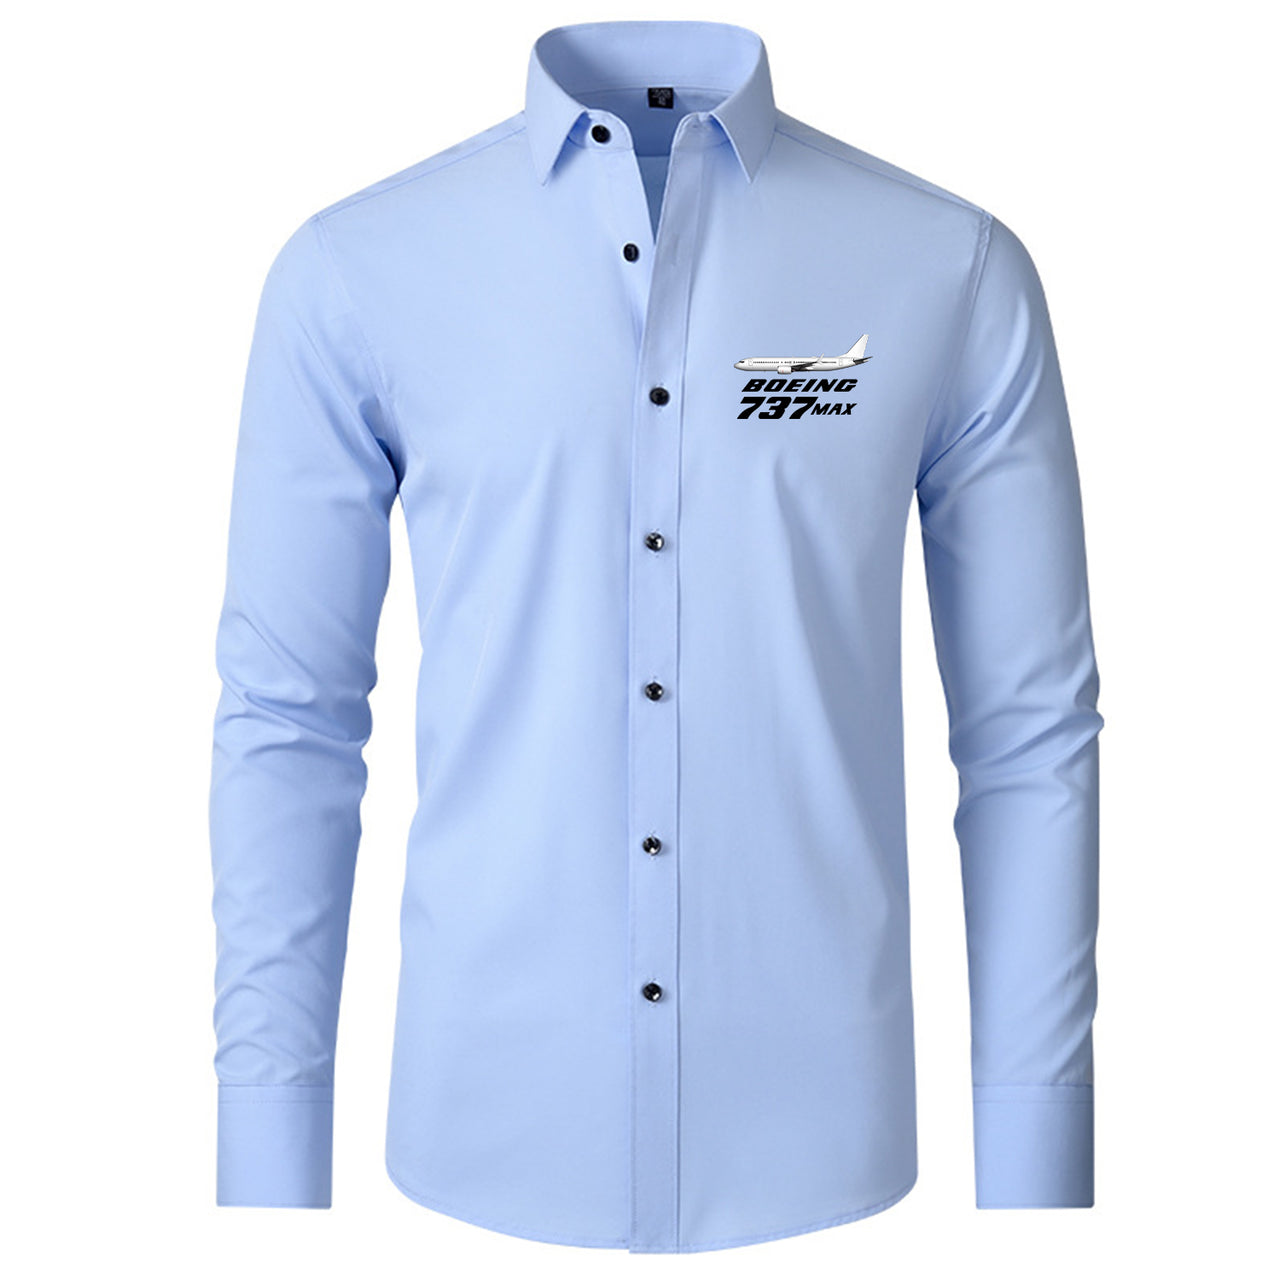 The Boeing 737Max Designed Long Sleeve Shirts